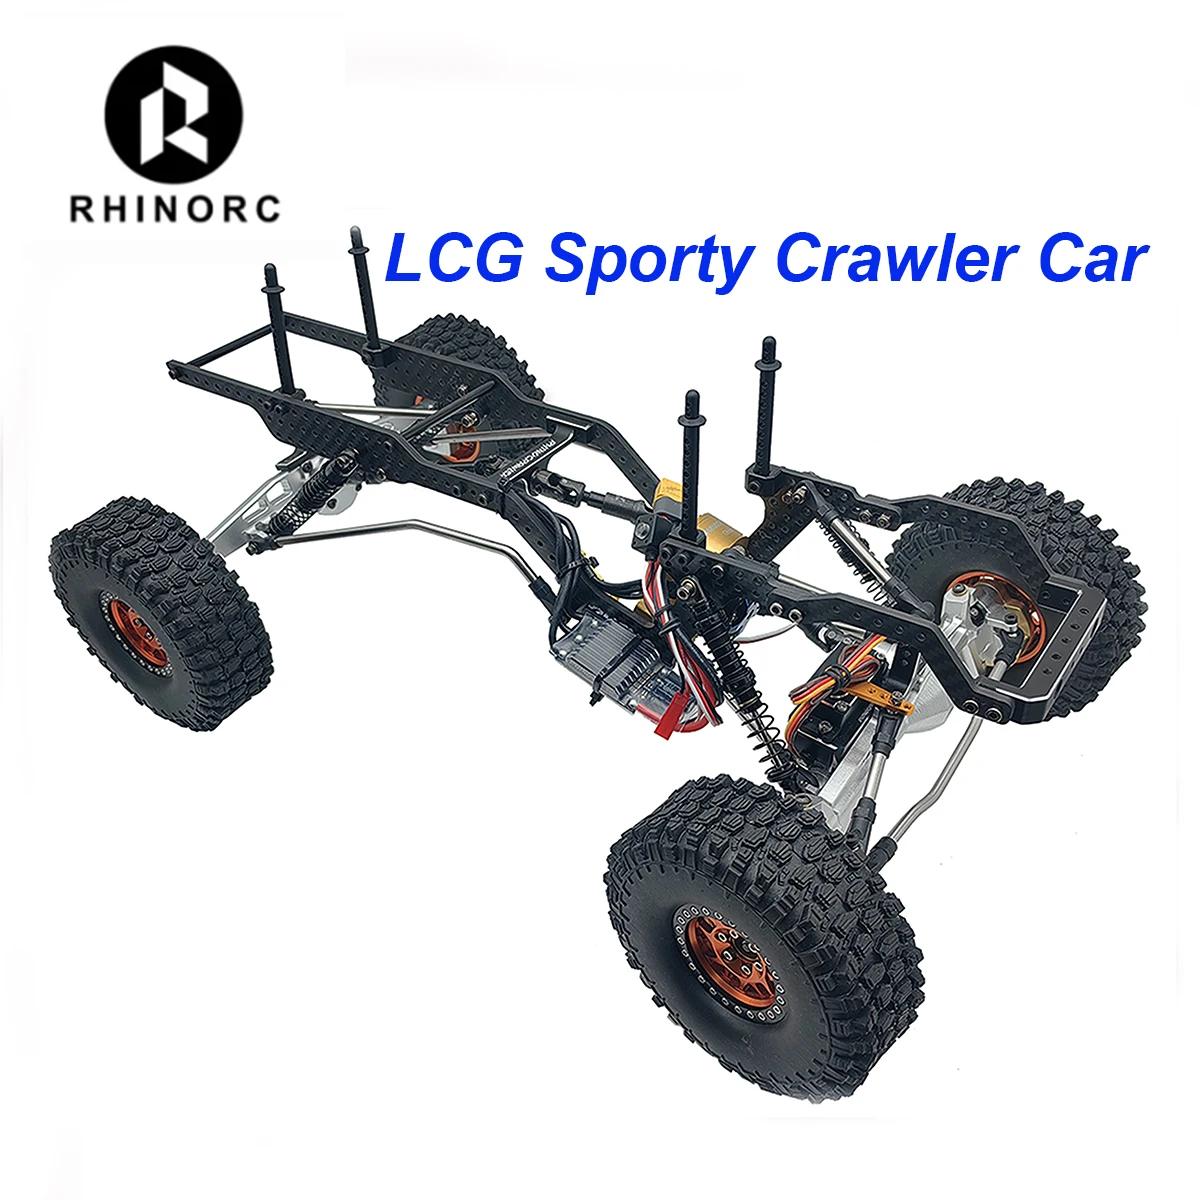 RhinoRC LCG Ƽ ũѷ ڵ, Ż  ׽ , AM32 80A ESC S12 ƿ  Ŀ ŰƮ, RC 1/10 ε